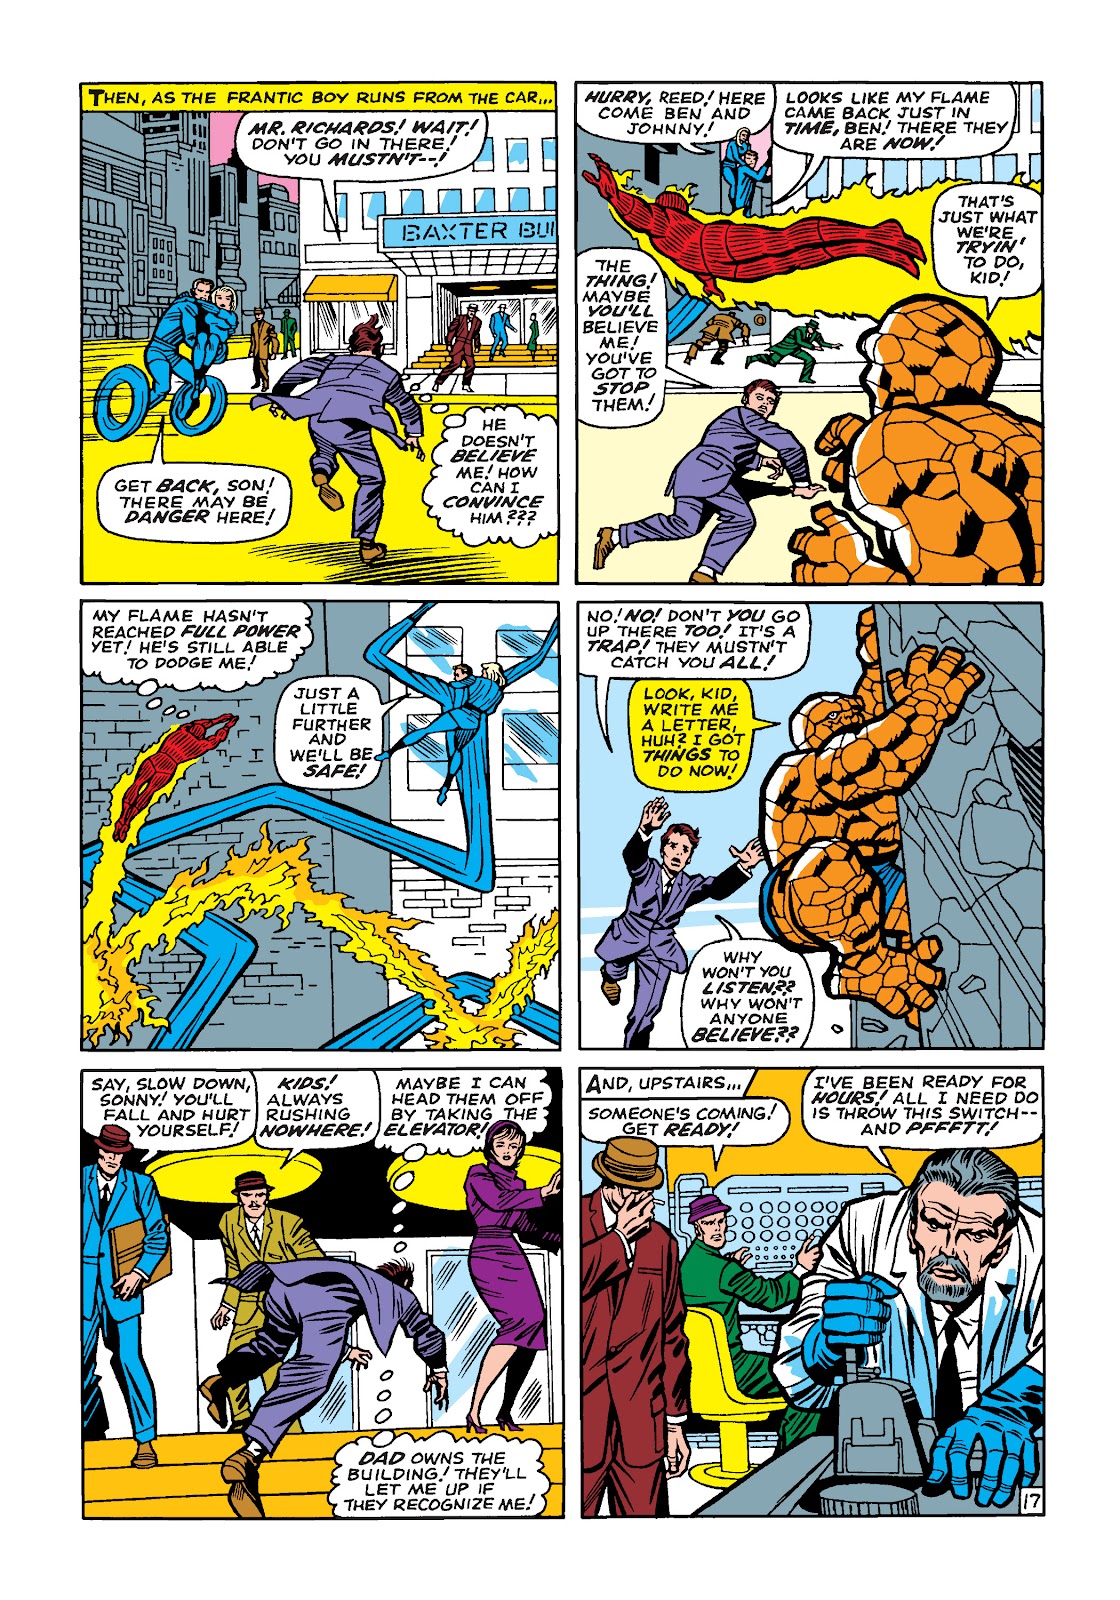 Read online Marvel Masterworks: The Fantastic Four comic - Issue # TPB 4 (Part 2) - 39